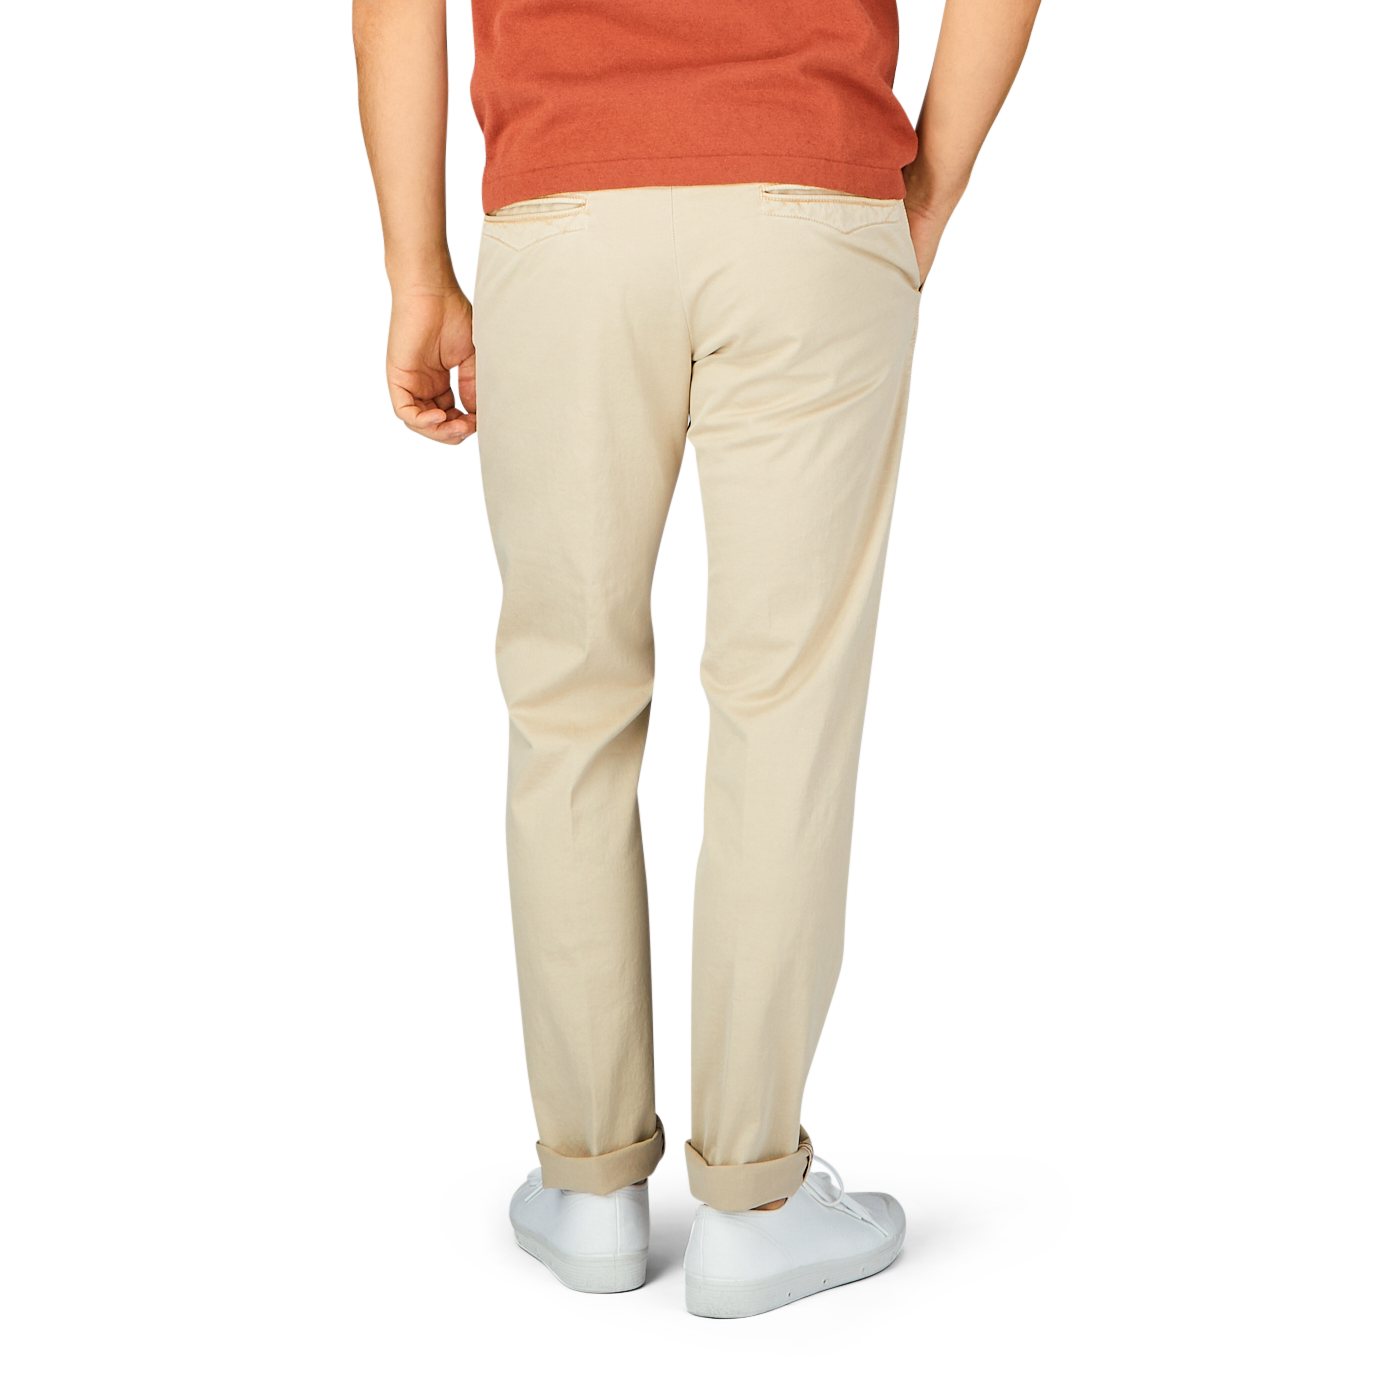 The back view of a man wearing Incotex Light Beige Cotton Stretch Slacks Chinos.